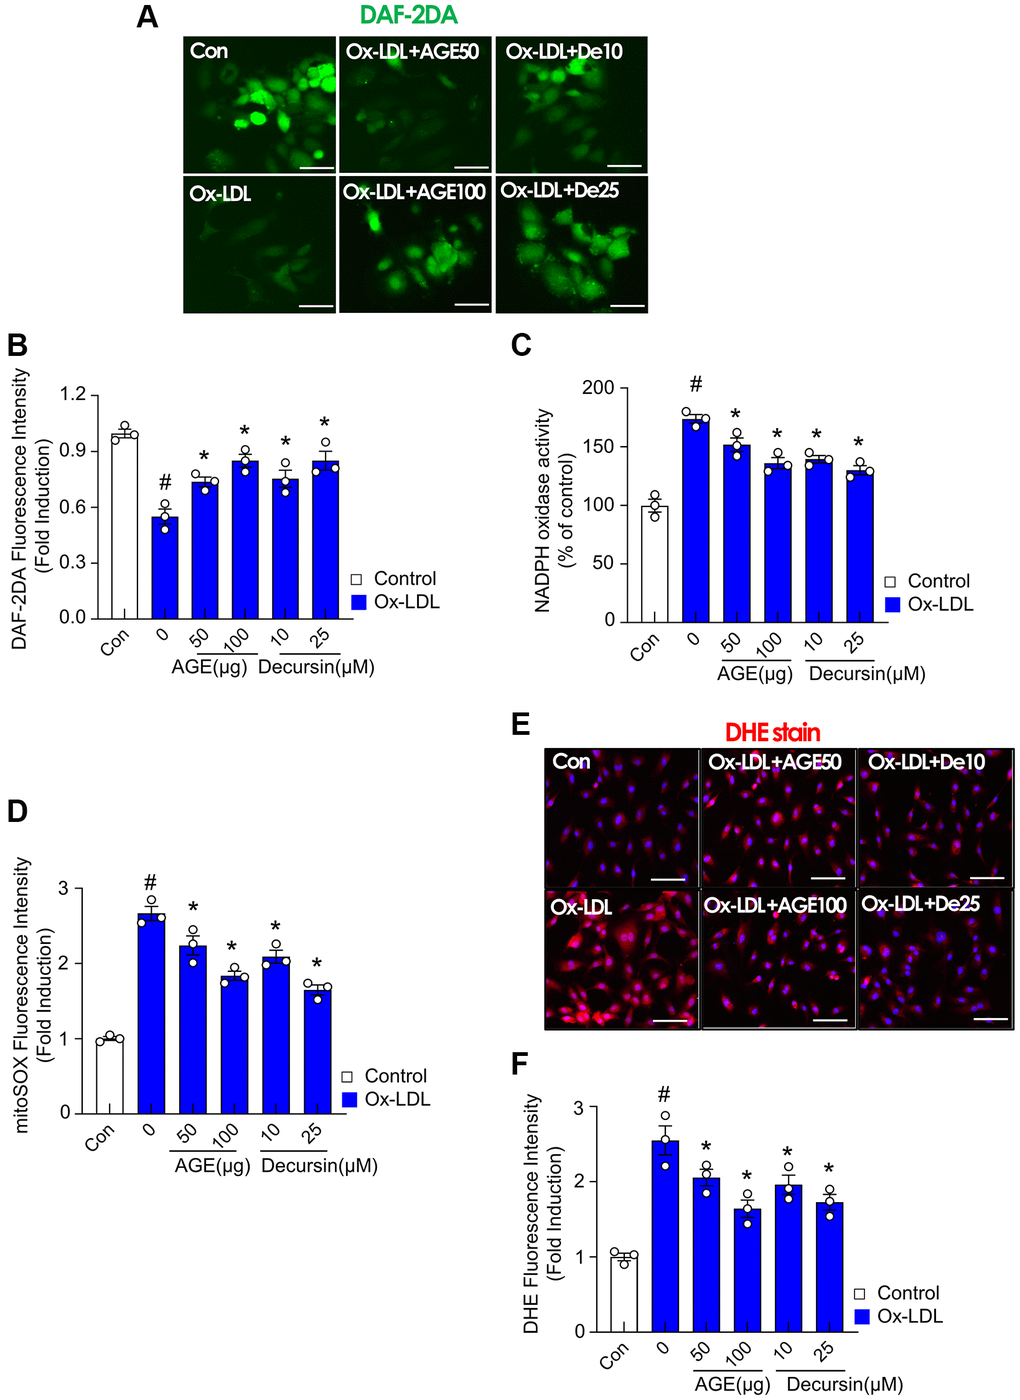 AGE improves endothelial cell functions in Ox-LDL-treated HUVECs. HUVECs were treated with decursin, or AGE, and then incubated with Ox-LDL for another 48 h. (A) NO production and (B) quantification of DAF-2DA fluorescence intensity. (C) NADPH oxidase activity was determined using lucigenin chemiluminescence assay. (D) Fluorescence intensity for mitoSOX levels was quantified in HUVECs. (E) Representative images of DHE staining for ROS production and (F) quantification of fluorescence intensity for ROS levels in HUVECs. #p *p n = 3). Abbreviations: NO: nitric oxide; DAF-2DA: diaminofluorescein-2 diacetate; Scale bar: 100 μm.